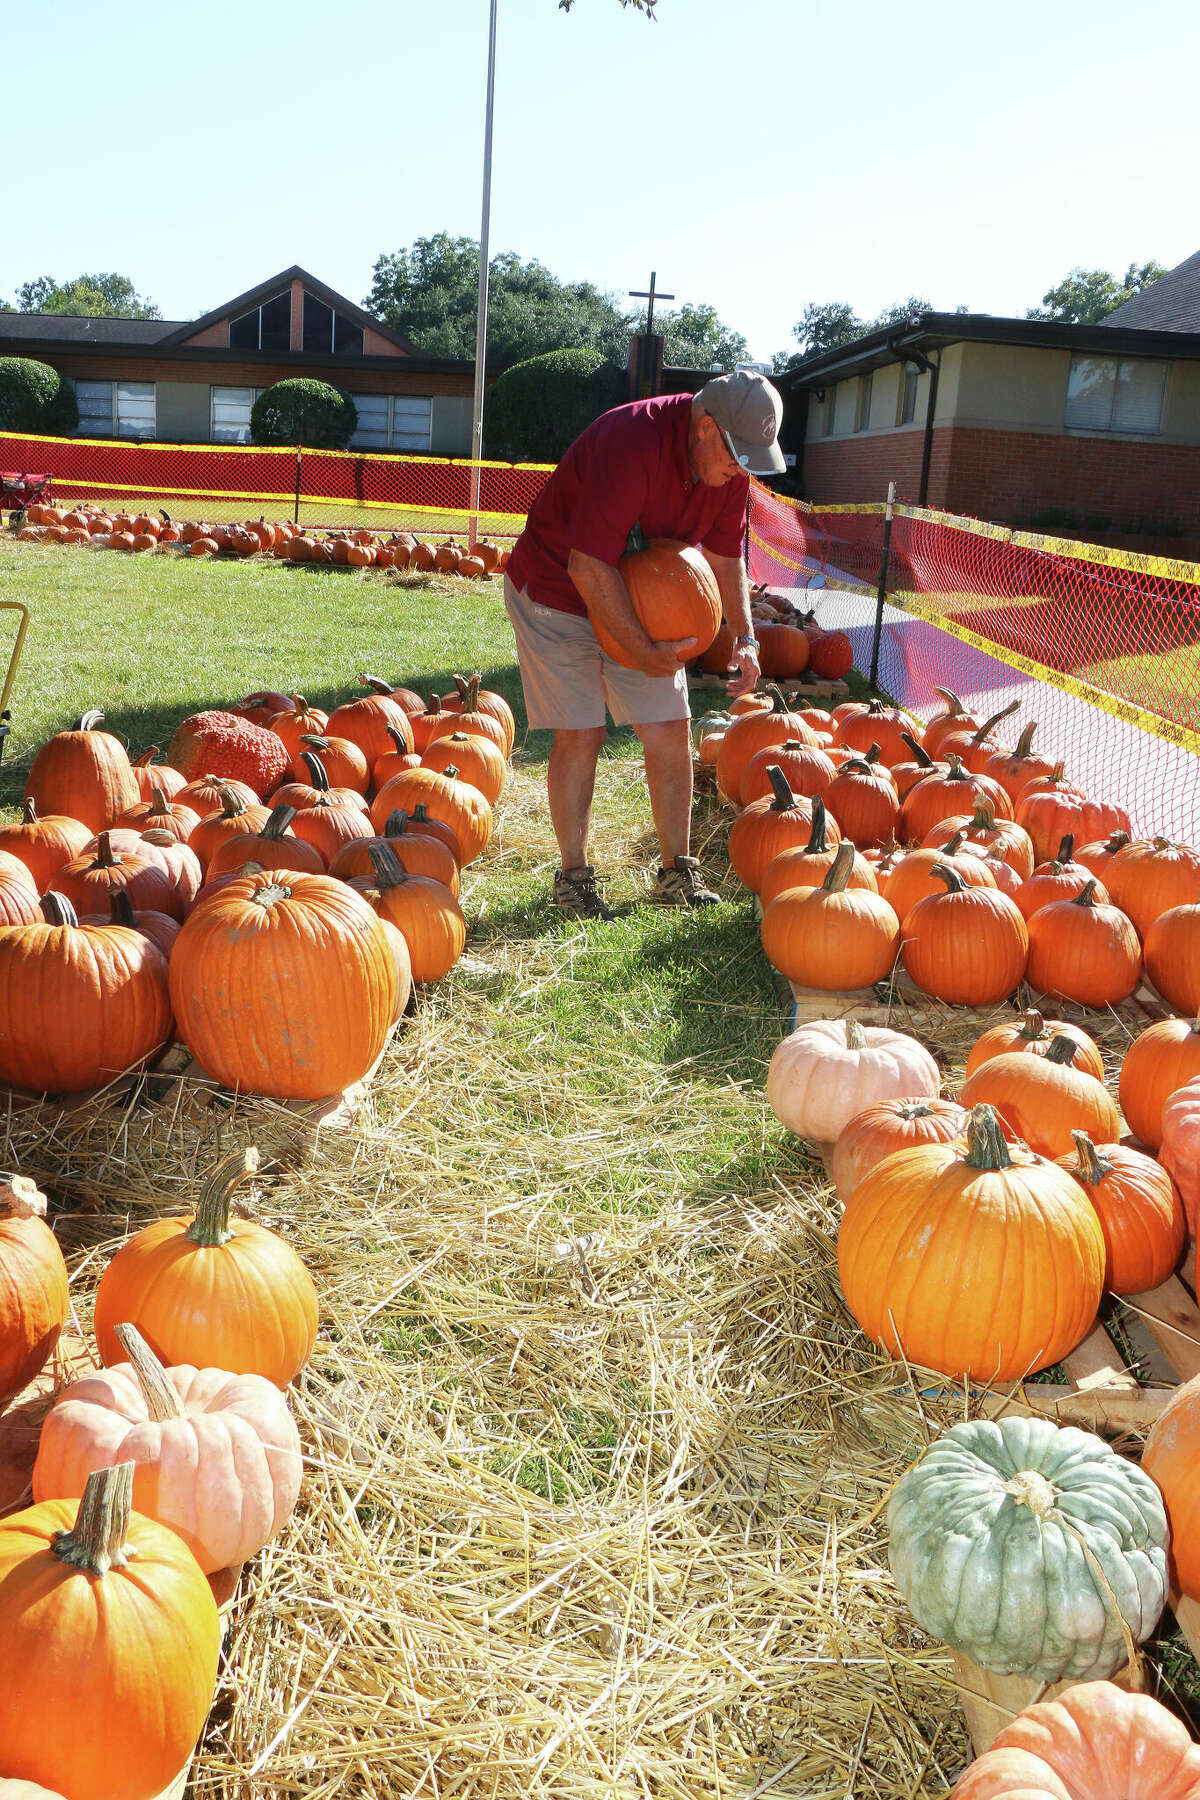 Chris Claunch, a volunteer in the patch, inspects gourds to see if they need to be moved in or out of the sun, or resituated in the patch to avoid bruising on the bottom. A full 18-wheeler truck containing nearly 40,000 pounds of pumpkins arrived at Crosby United Methodist Church earlier this month for the church's annual pumpkin patch. Most of the pumpkins you'll find in Houston aren't actually grown here.